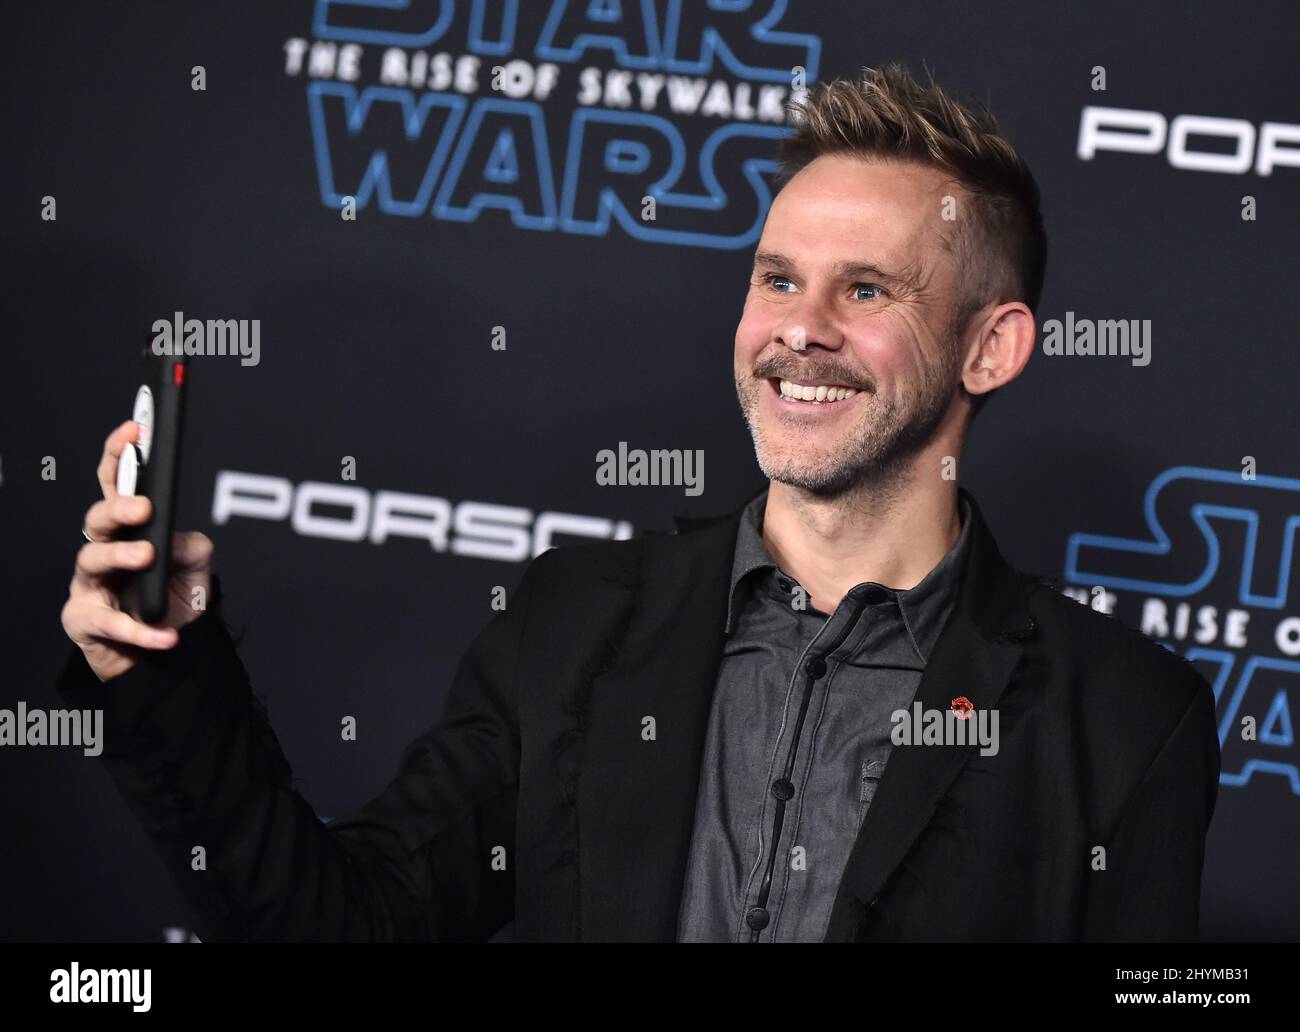 Dominic Monaghan attending the World Premiere of Star Wars: The Rise of Skywalker in Los Angeles Stock Photo